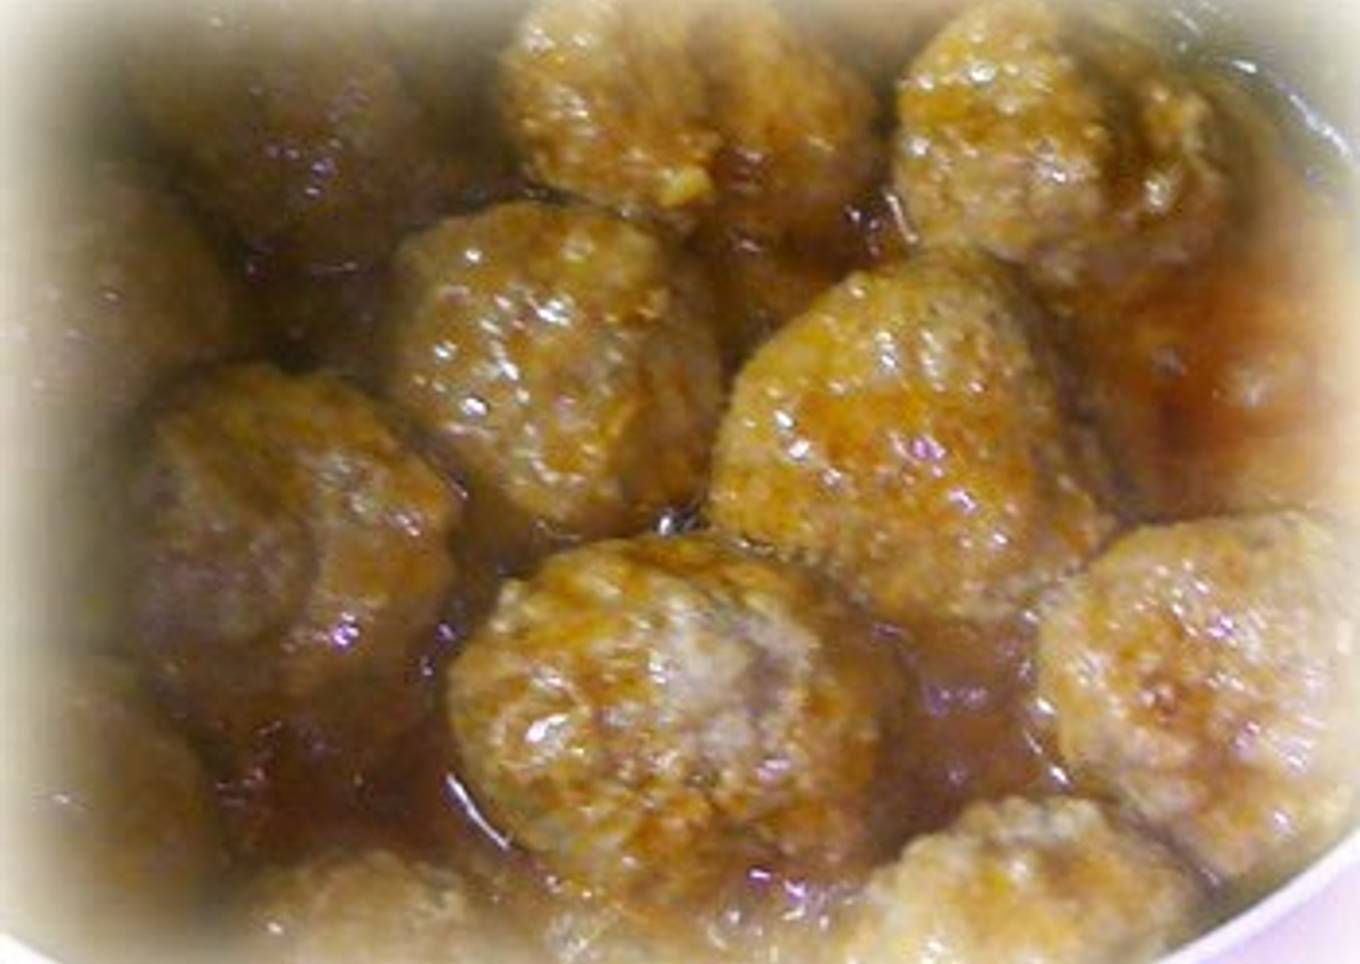 Minced Beef and Pork Meatballs